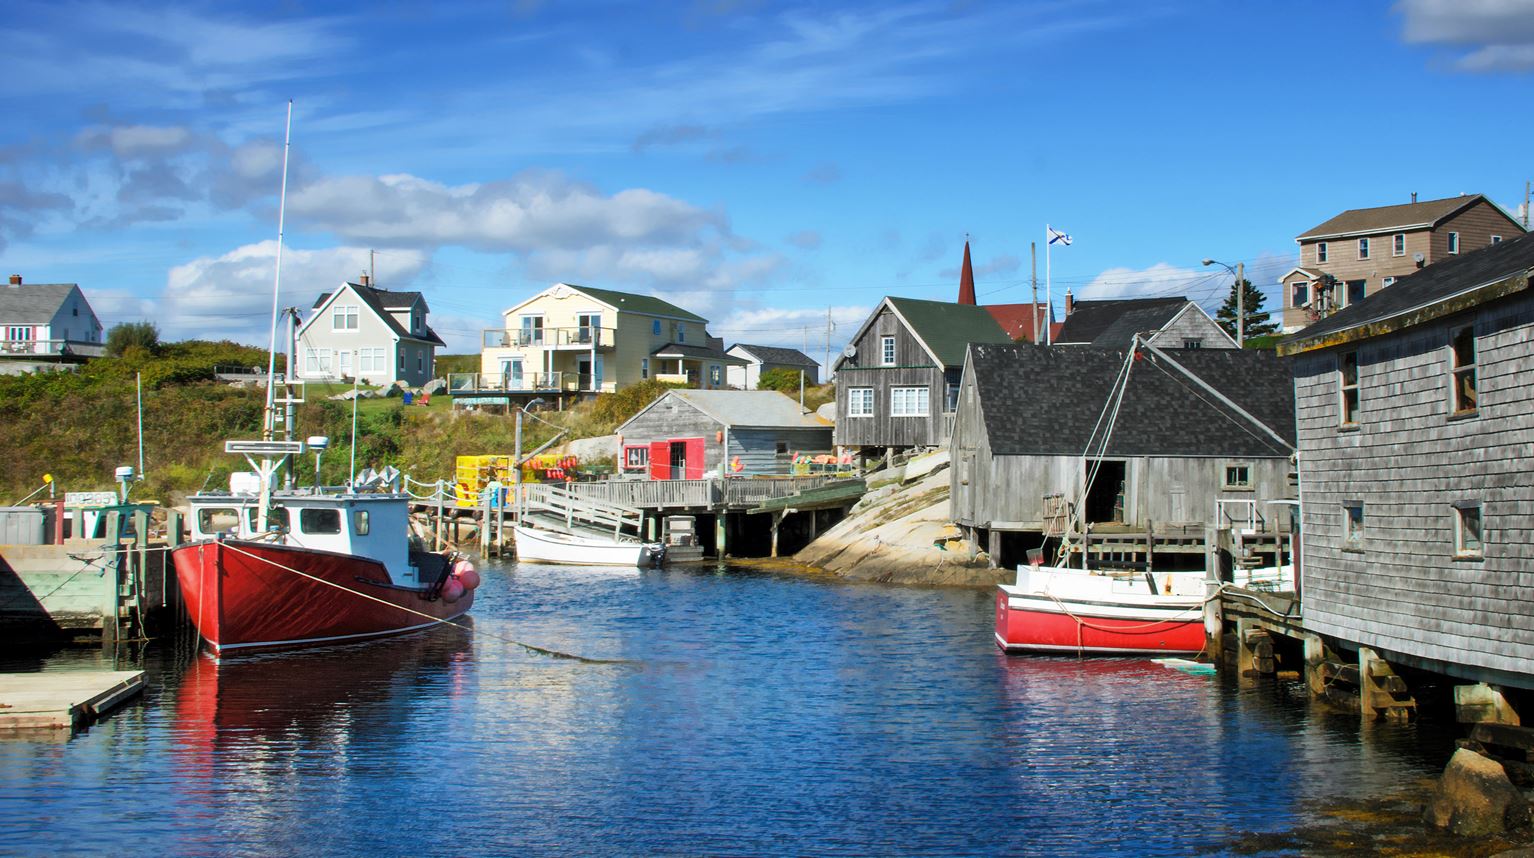 Full View of Peggys Cove town with boats on water, Nova Scotia, Canada